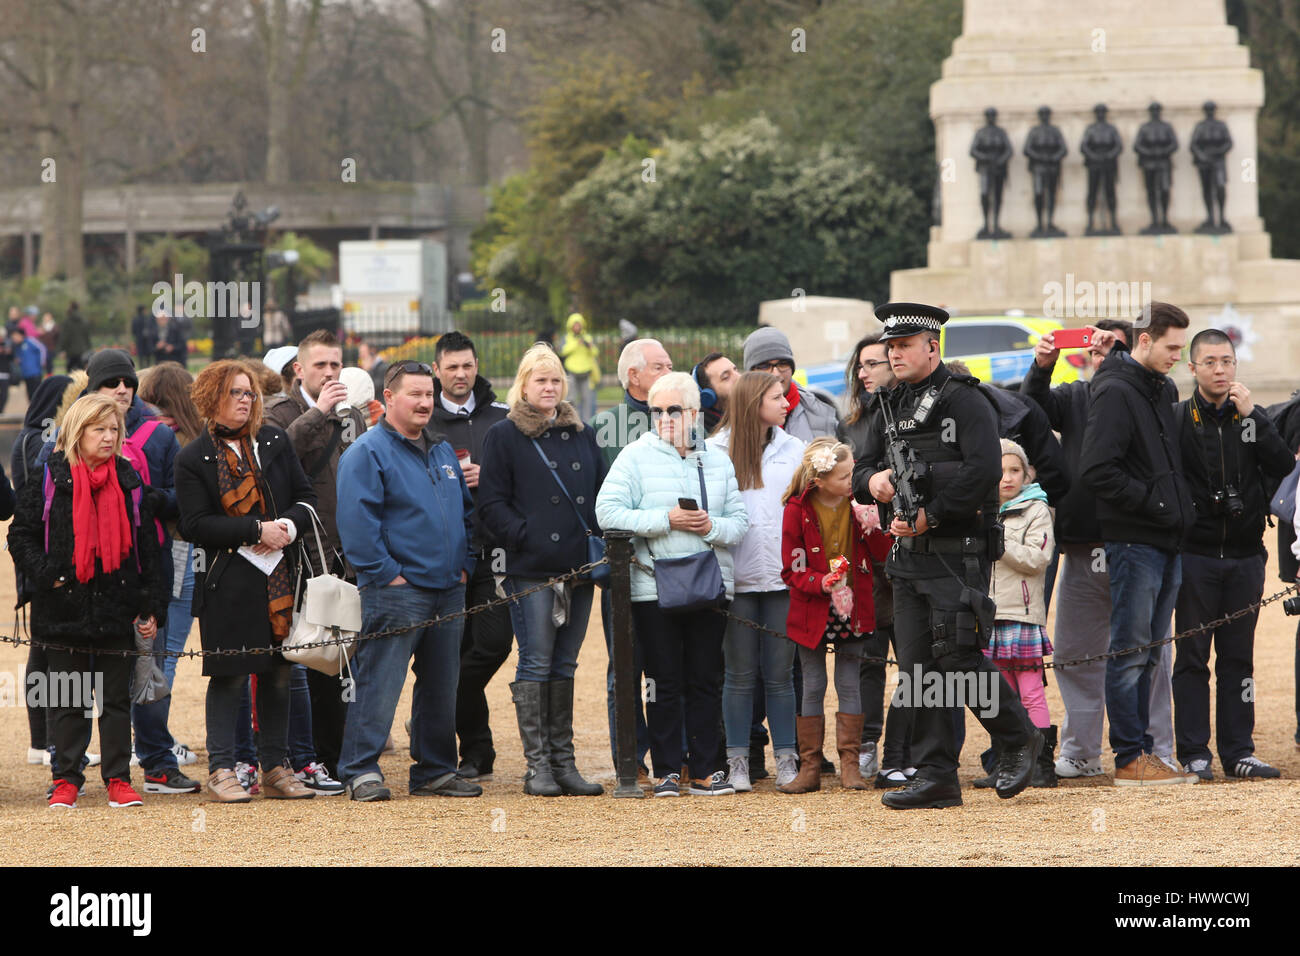 London, UK. 23rd March 2017.   Armed Police watch over mounted soldiers and tourists on Horse Guards Parade. Credit: Nigel Bowles/Alamy Live News Stock Photo